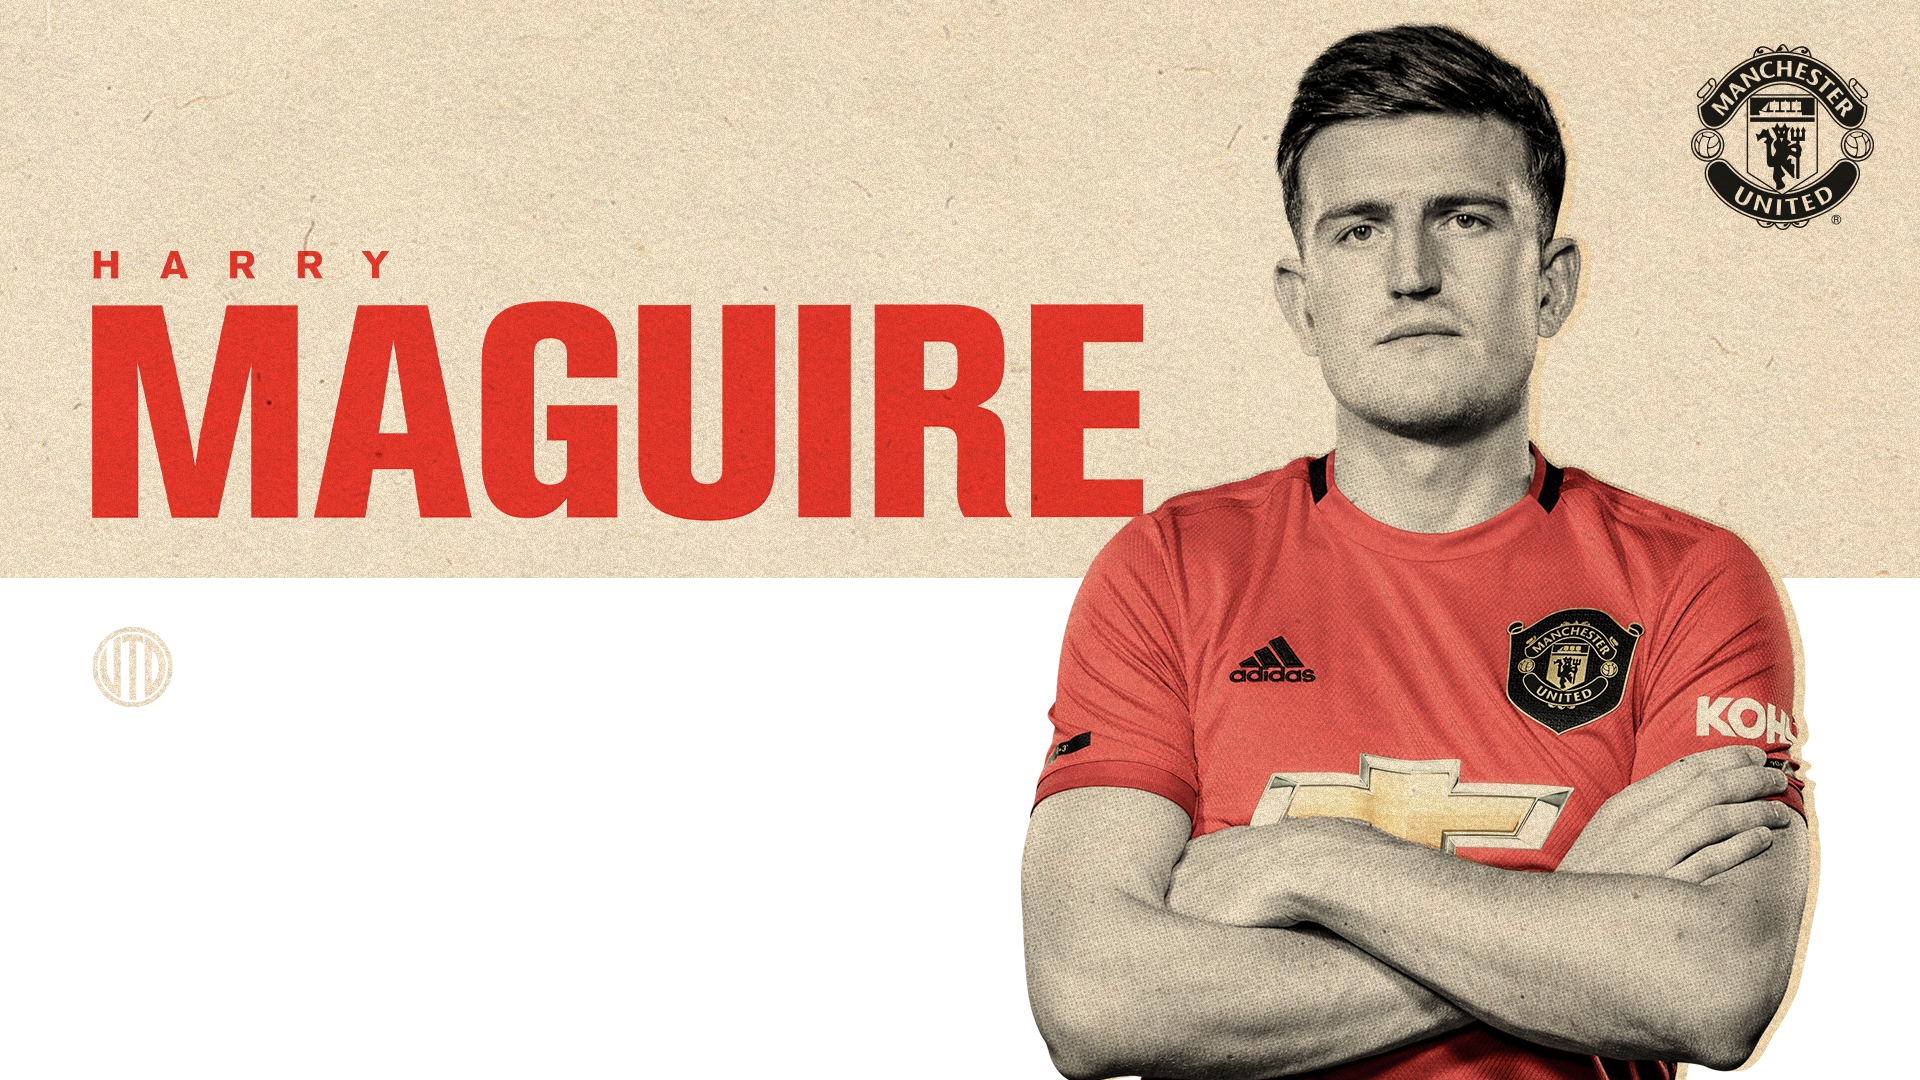 Harry Maguire Wallpaper Free .wallpaperaccess.com